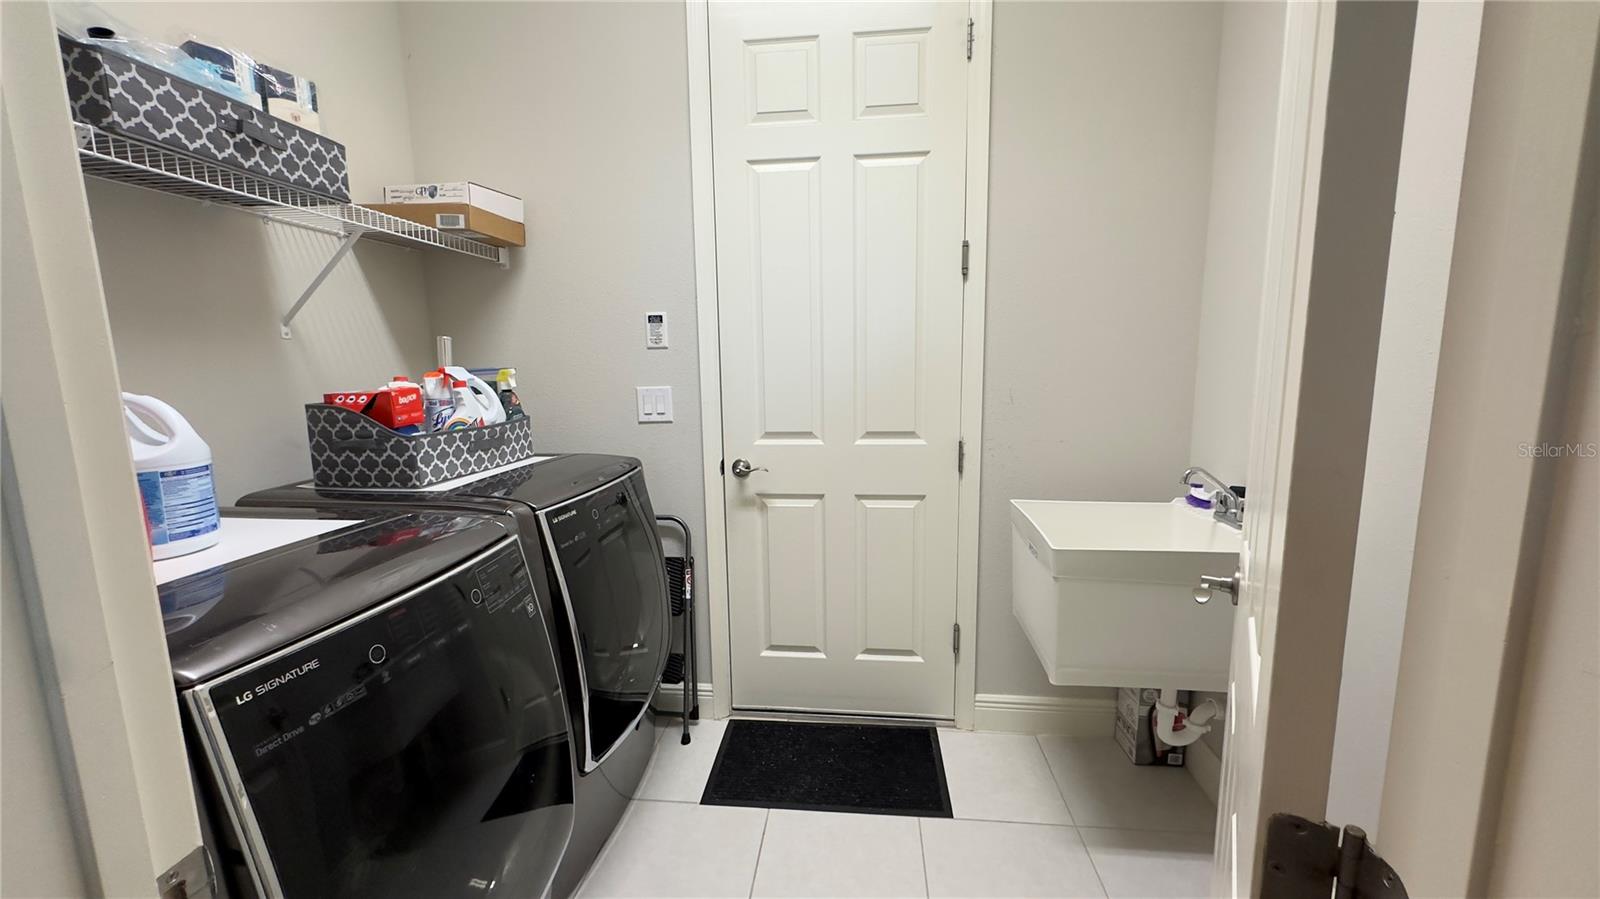 The spacious laundry room conveniently includes a tub and gives access to the garage